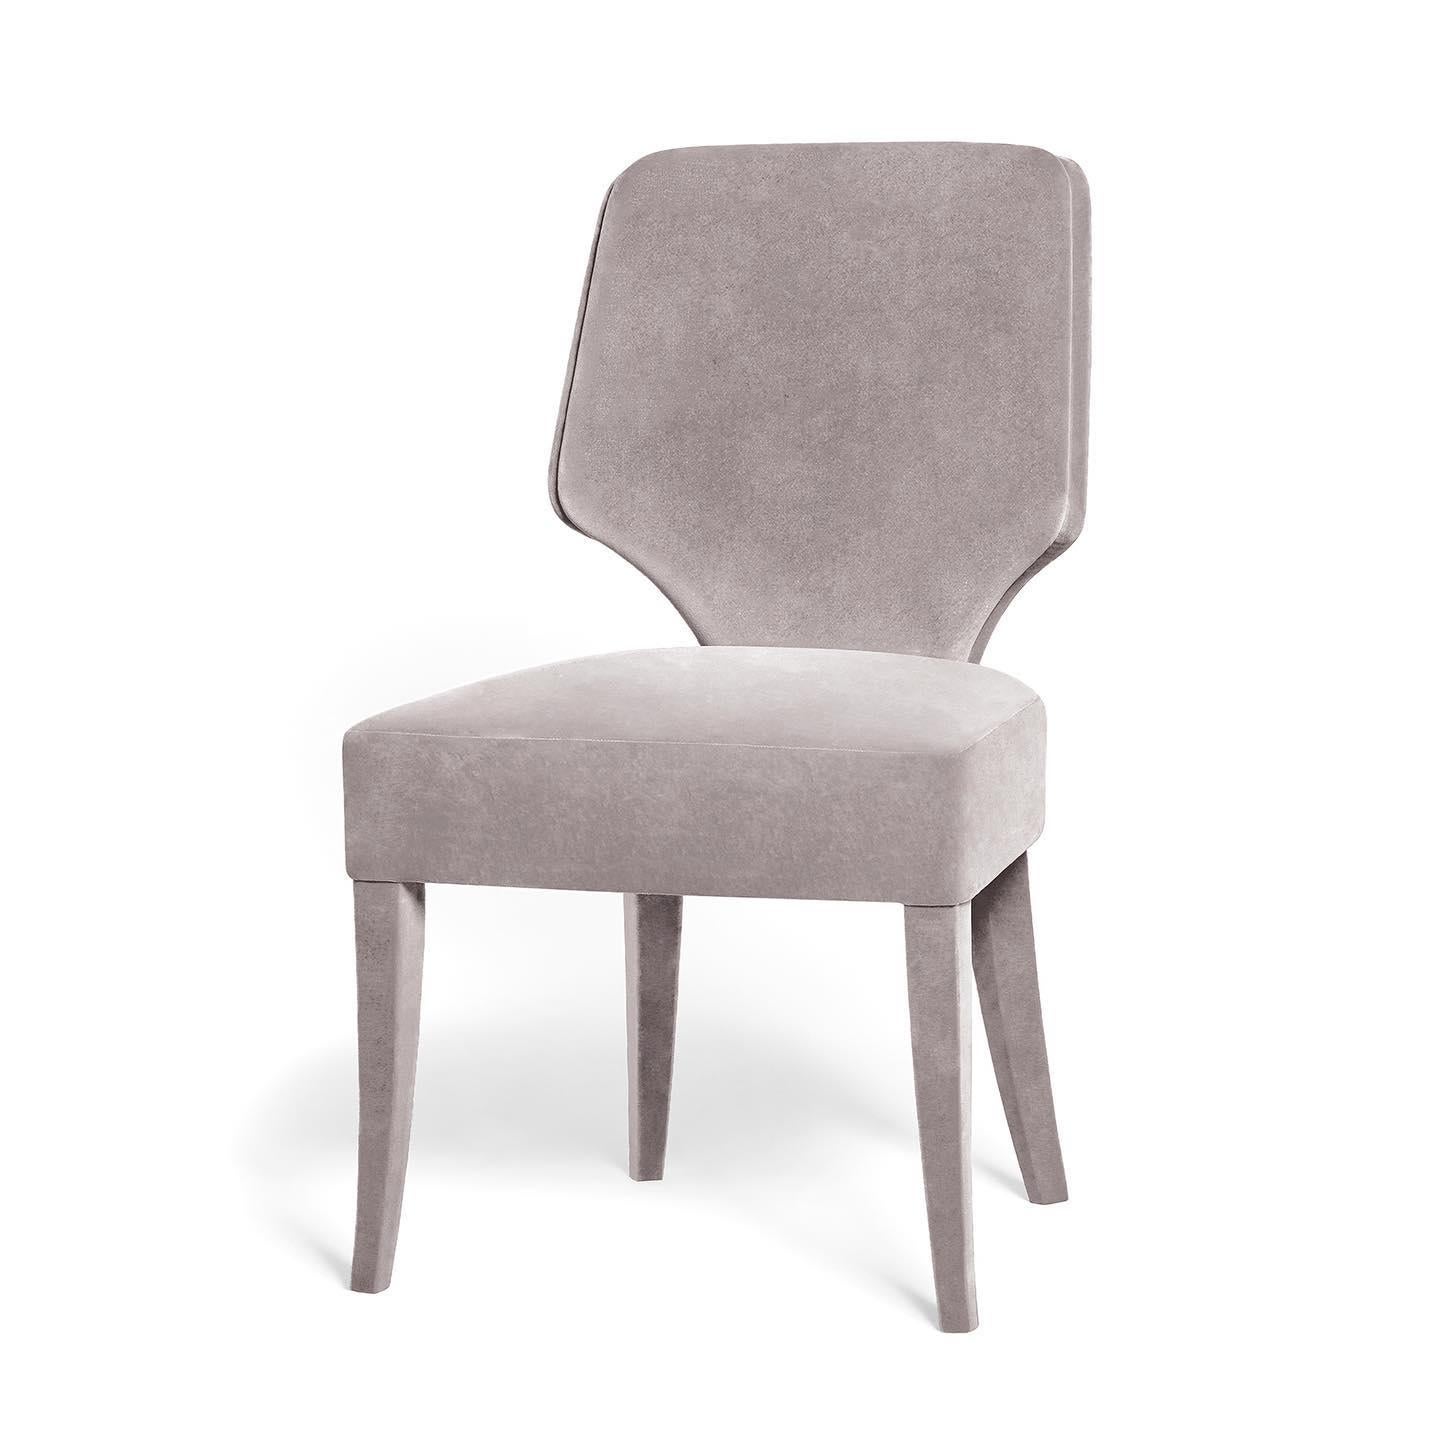 Contemporary Dining Chair with Seaming Details on the Back For Sale 3